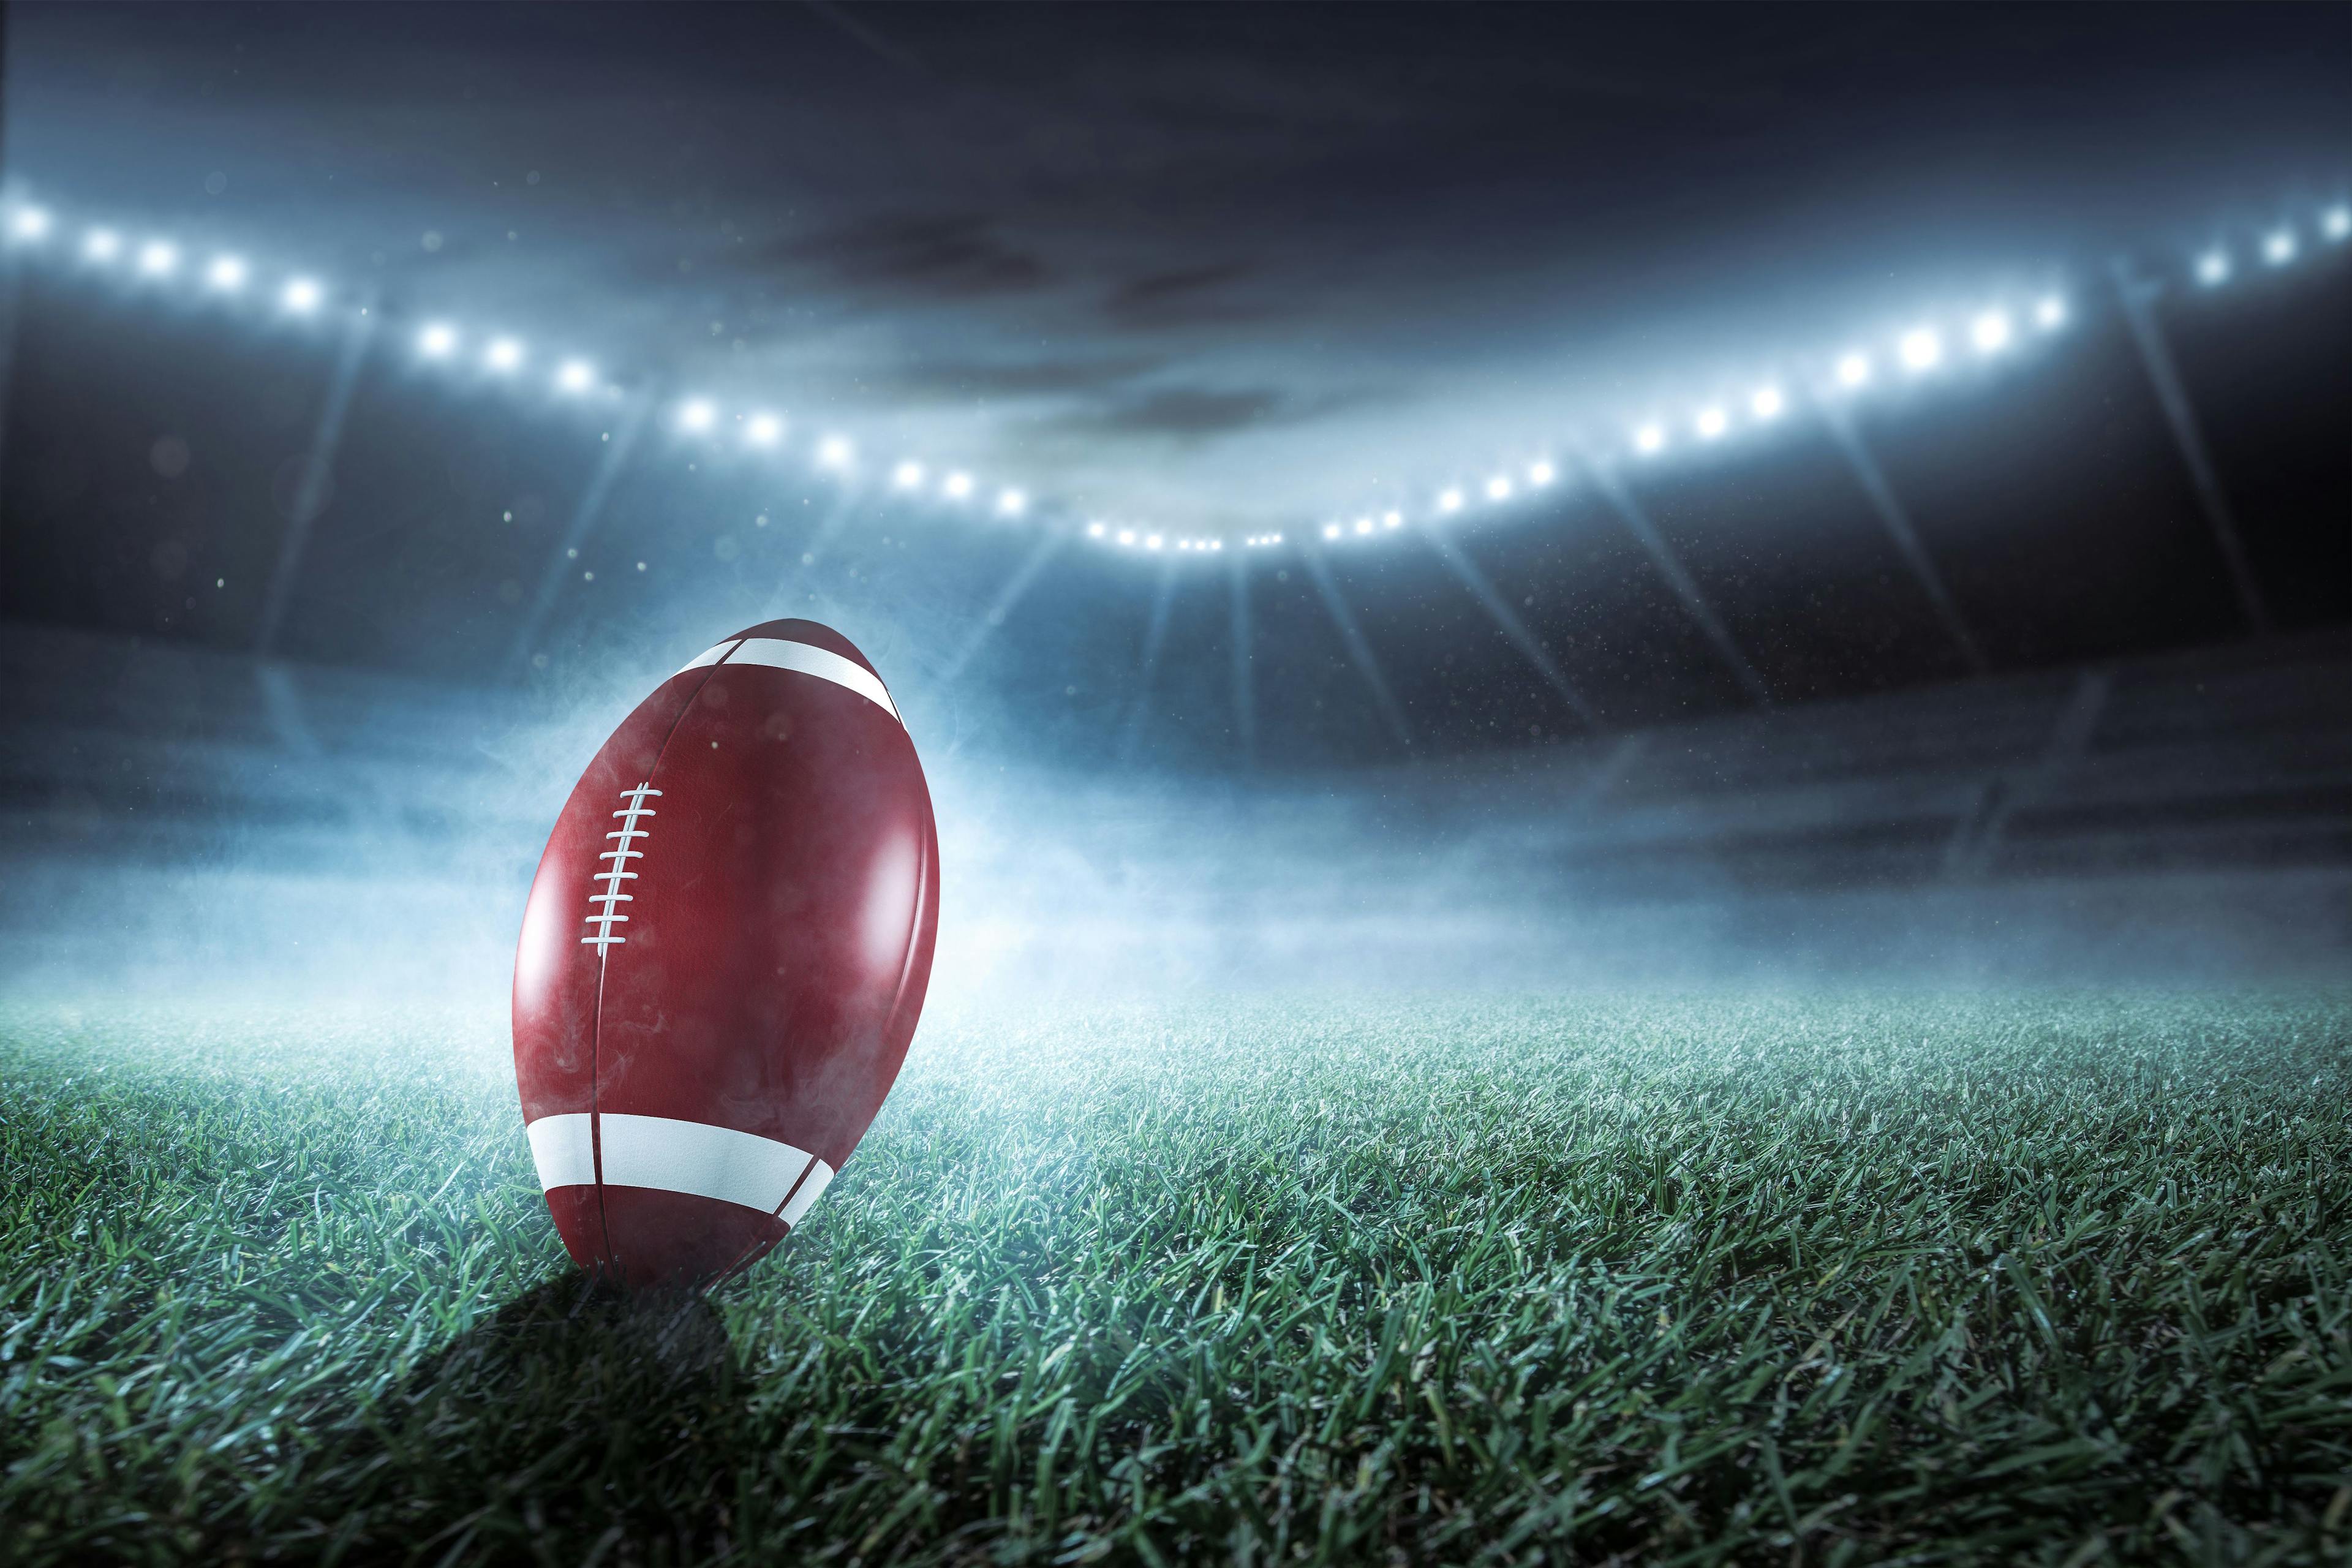 Pfizer's commercial aired during the third quarter of Super Bowl LVIII | Image credit: m.mphoto - stock.adobe.com